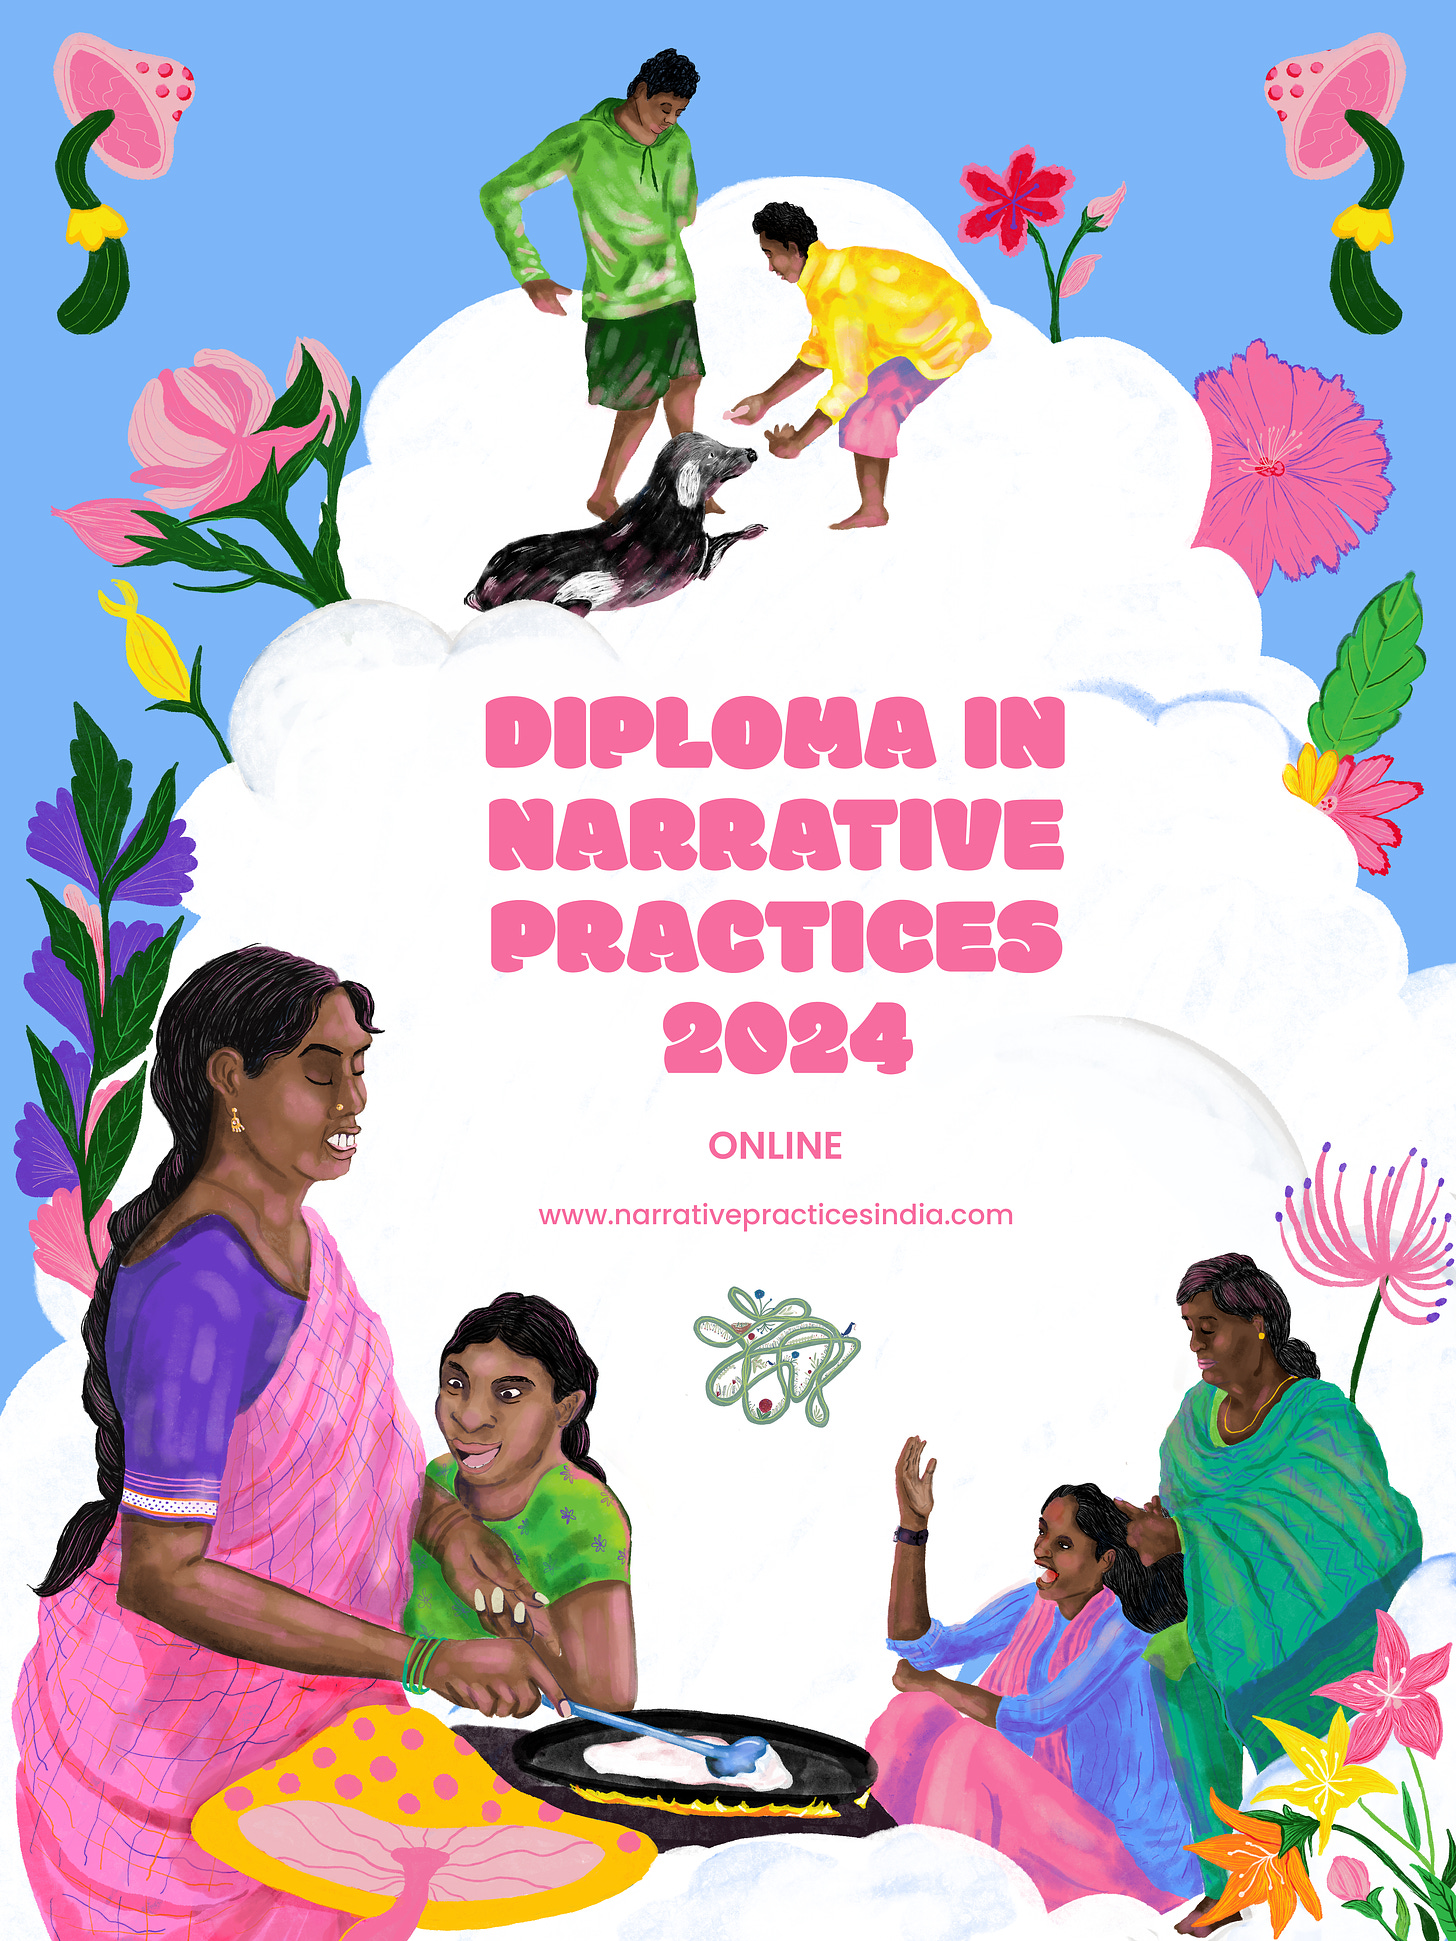 Flyer announcing Diploma in Narrative Practices 2024 Online with NPI logo and website address which is www.narrativepracticesindia.com. The image on the flyer has a big white cloud in the middle and around that are people doing everyday tasks like making dosa, combing someone's hair and playing with dog. The outer border is surrounded by flowers and mushroom.